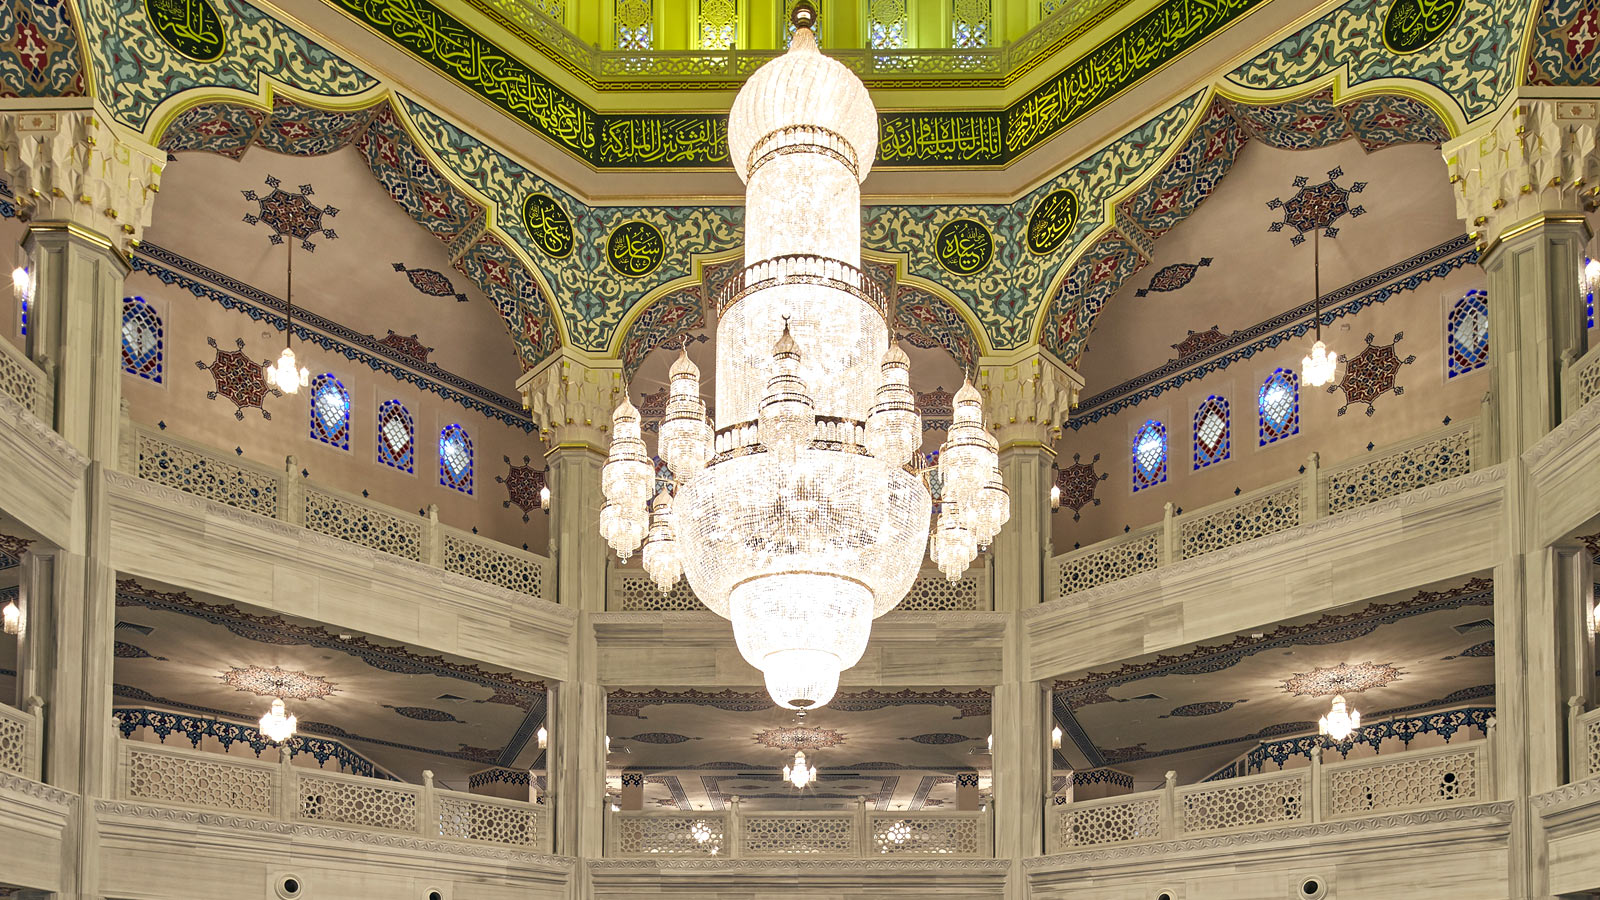 Moscow Central Mosque Chandelier - Russia